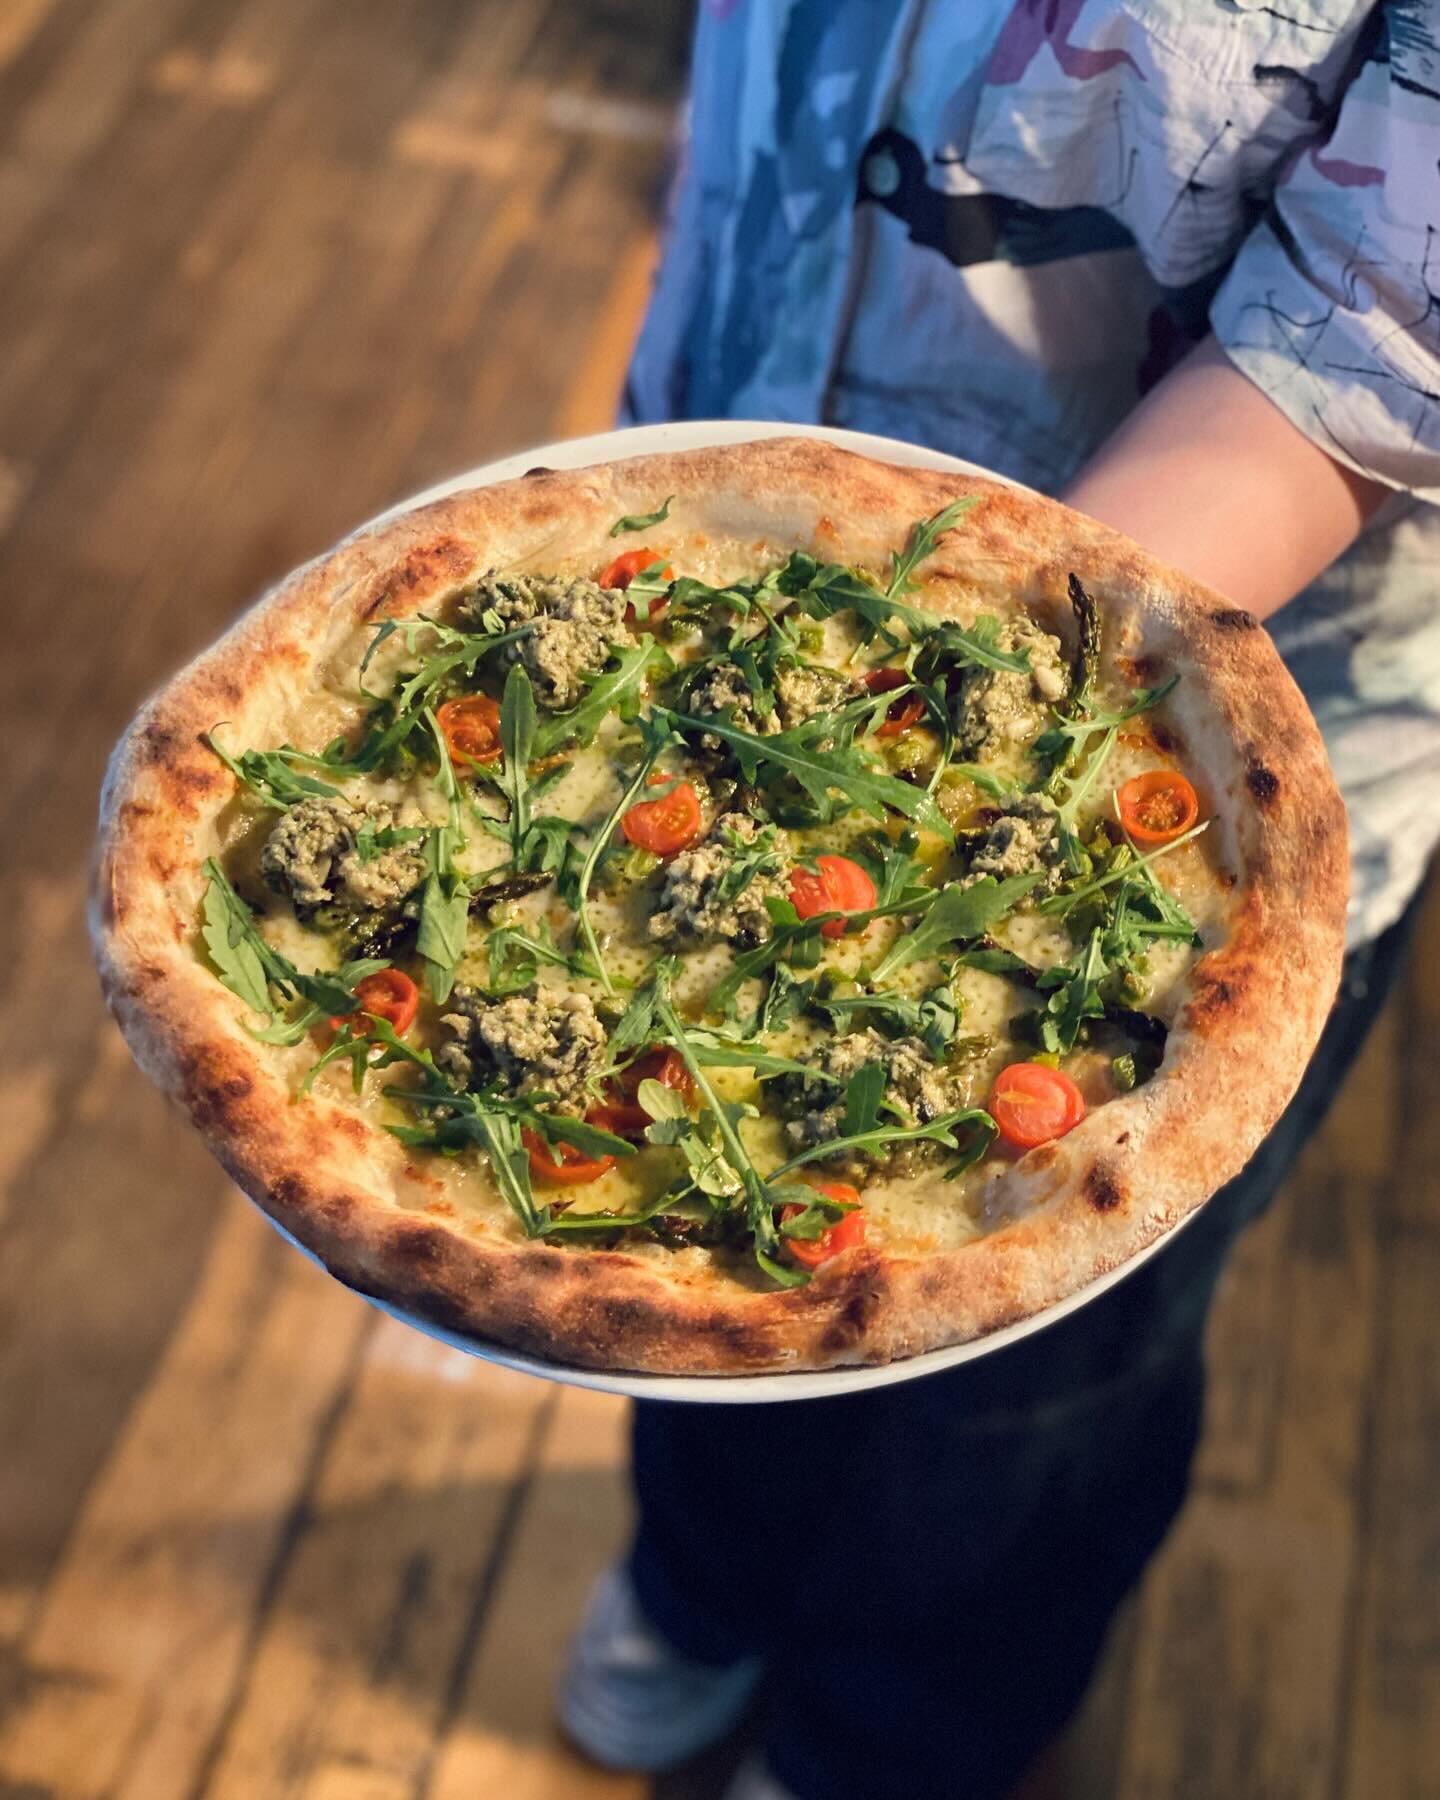 Could have been The Billy but it's THE GRUFF - Goats Cheese Cream, Mozzarella, Roasted Asparagus, Cherry Tomato, Artichoke Pesto &amp; Rocket 🐐🍕 On the specials board.

#doughandoil #sourdoughpizza #specialsboard